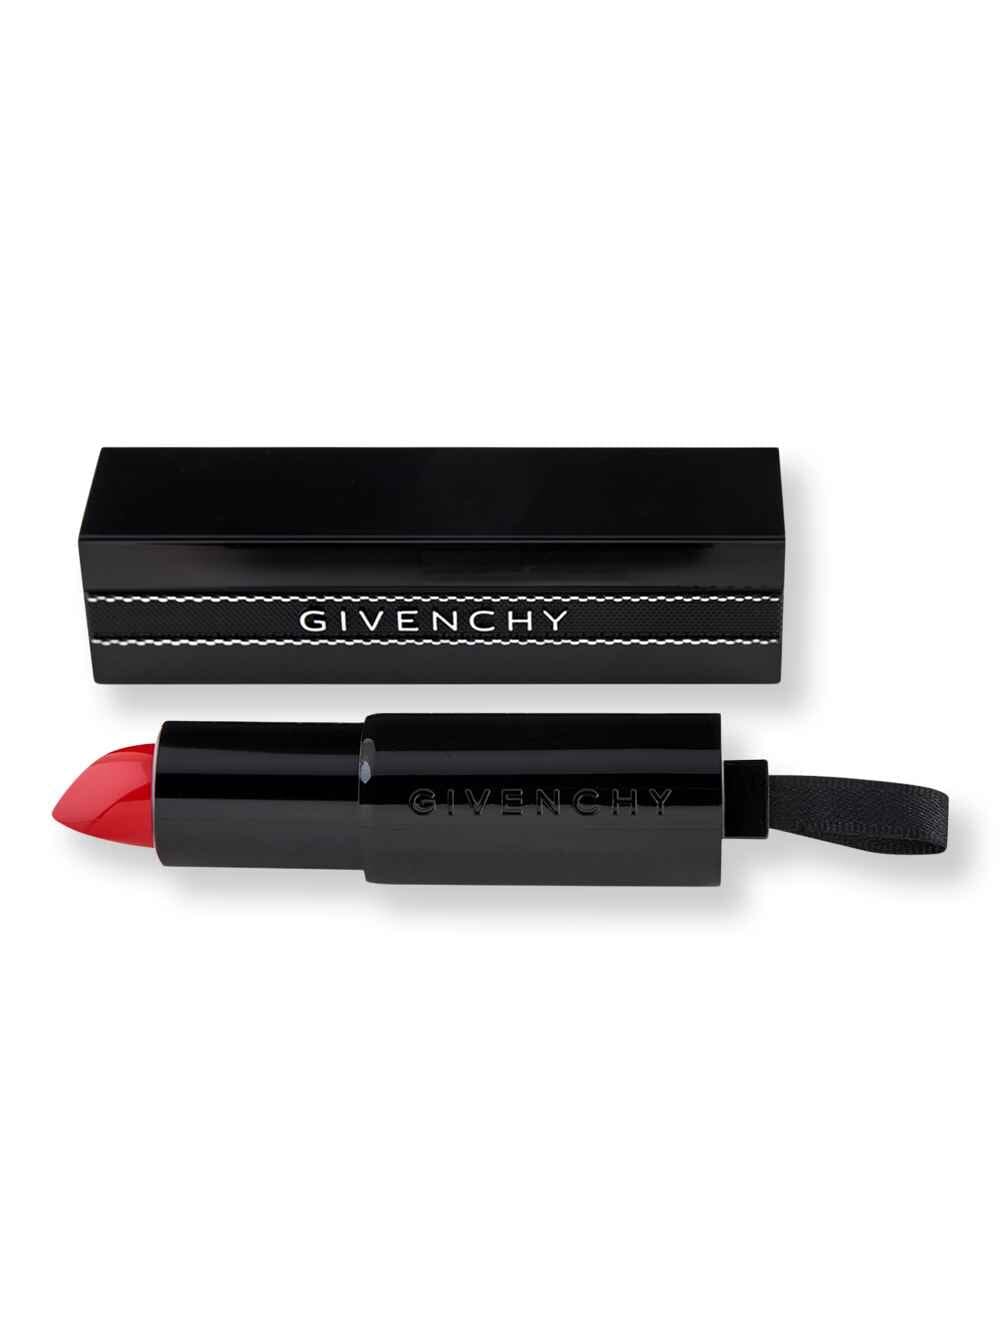 Givenchy Givenchy Rouge Interdit Illicit Color .12 oz3.4 g14 Redlight Lipstick, Lip Gloss, & Lip Liners 